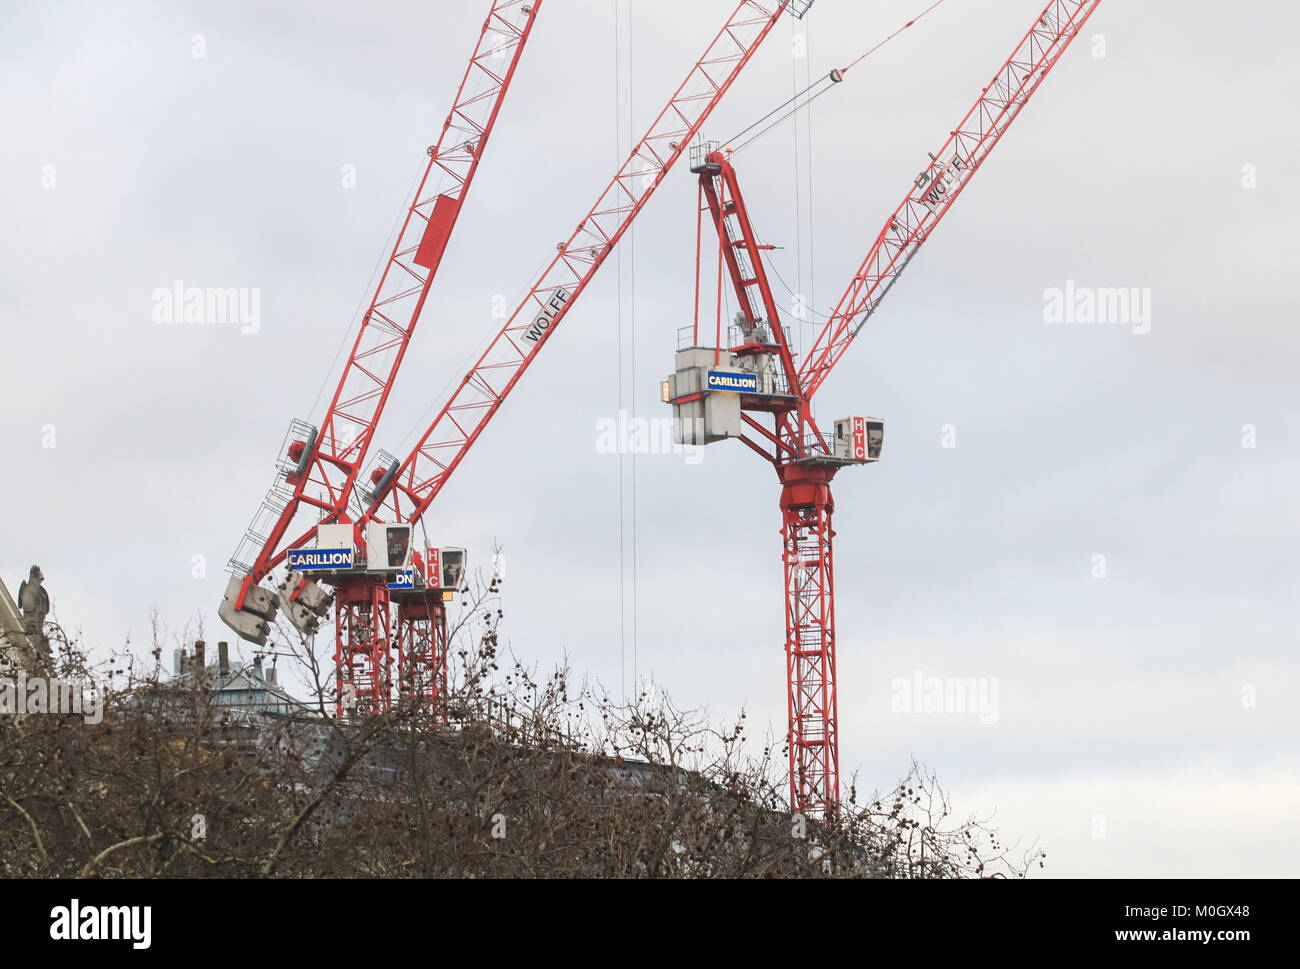 London, UK. 22nd Jan, 2018. The second largest construction company Carillon based in Wolverhampton which employed 43,000 people including 20,000 in the UK has collpased and went into liquidation on Monday 15th January 2018 and the company is mired in £1.3bn debt with a vast pensions deficit. The government and British Transport secretary Chris Grayling have been criticised for awarding contracts to HS2 rail link and ordered an investigation into Carillion directors. Credit: amer ghazzal/Alamy Live News Stock Photo